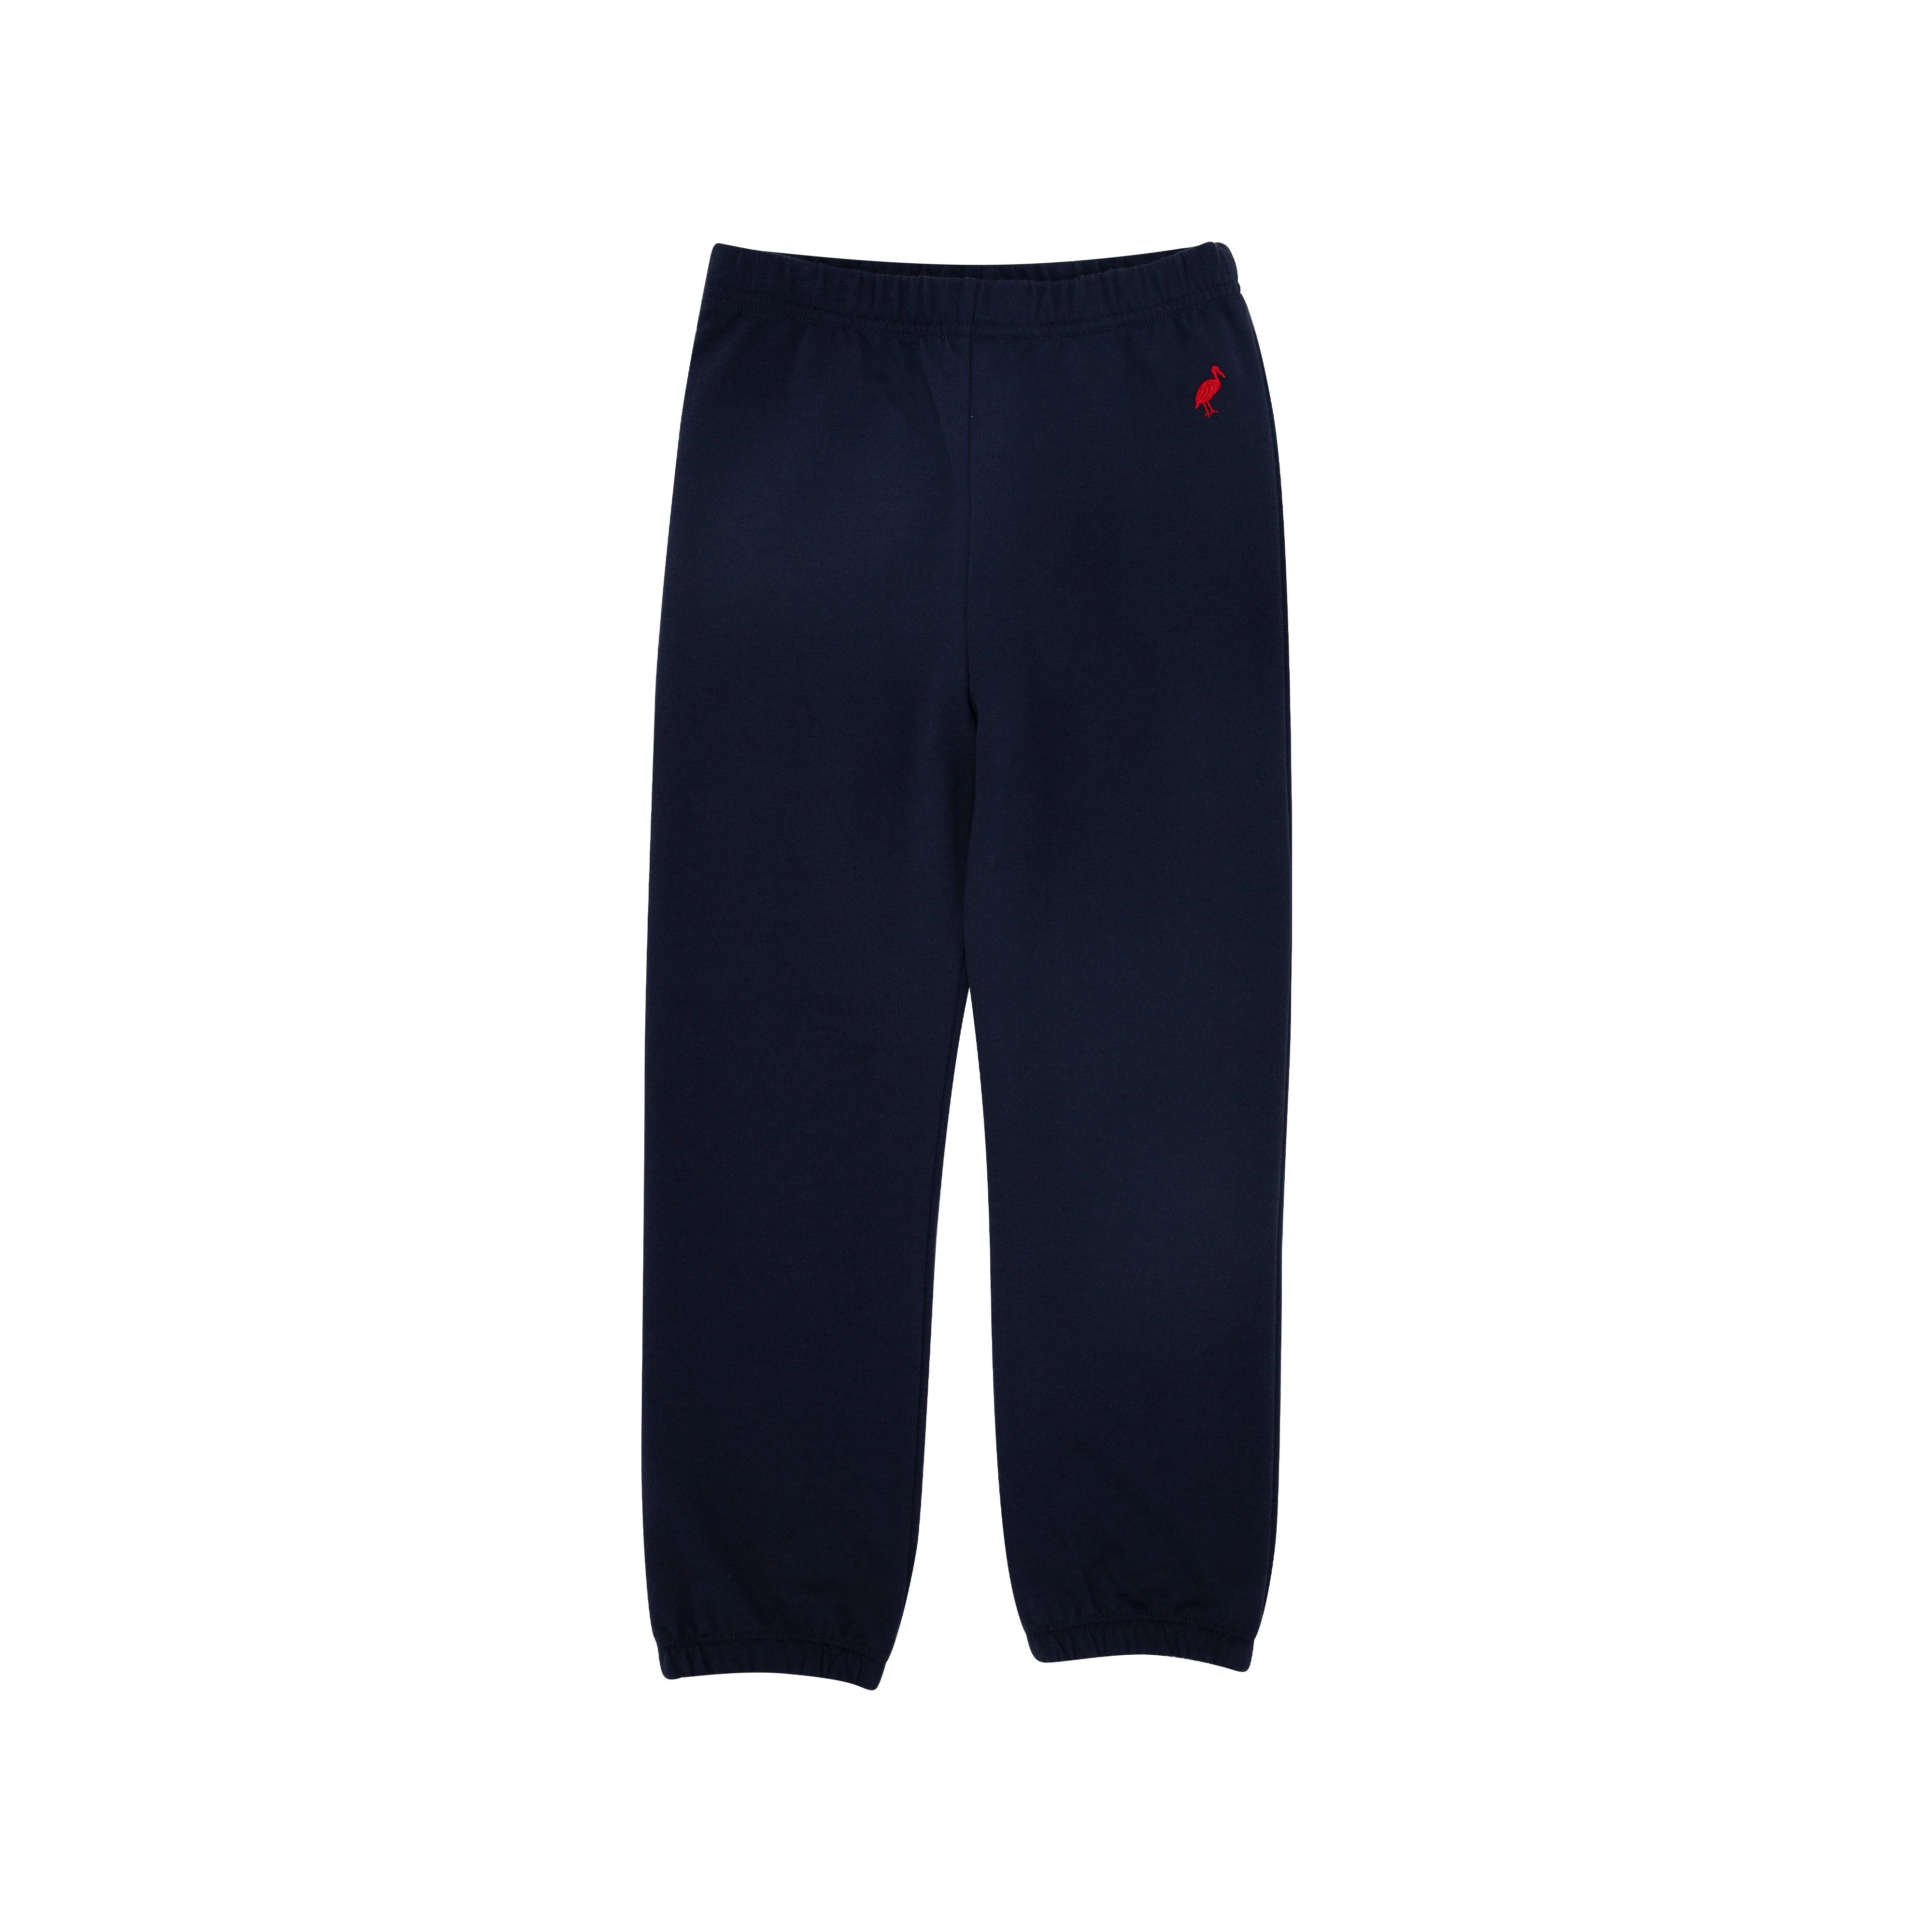 Gates Sweeney Sweatpants - Nantucket Navy with Richmond Red Stork | The Beaufort Bonnet Company